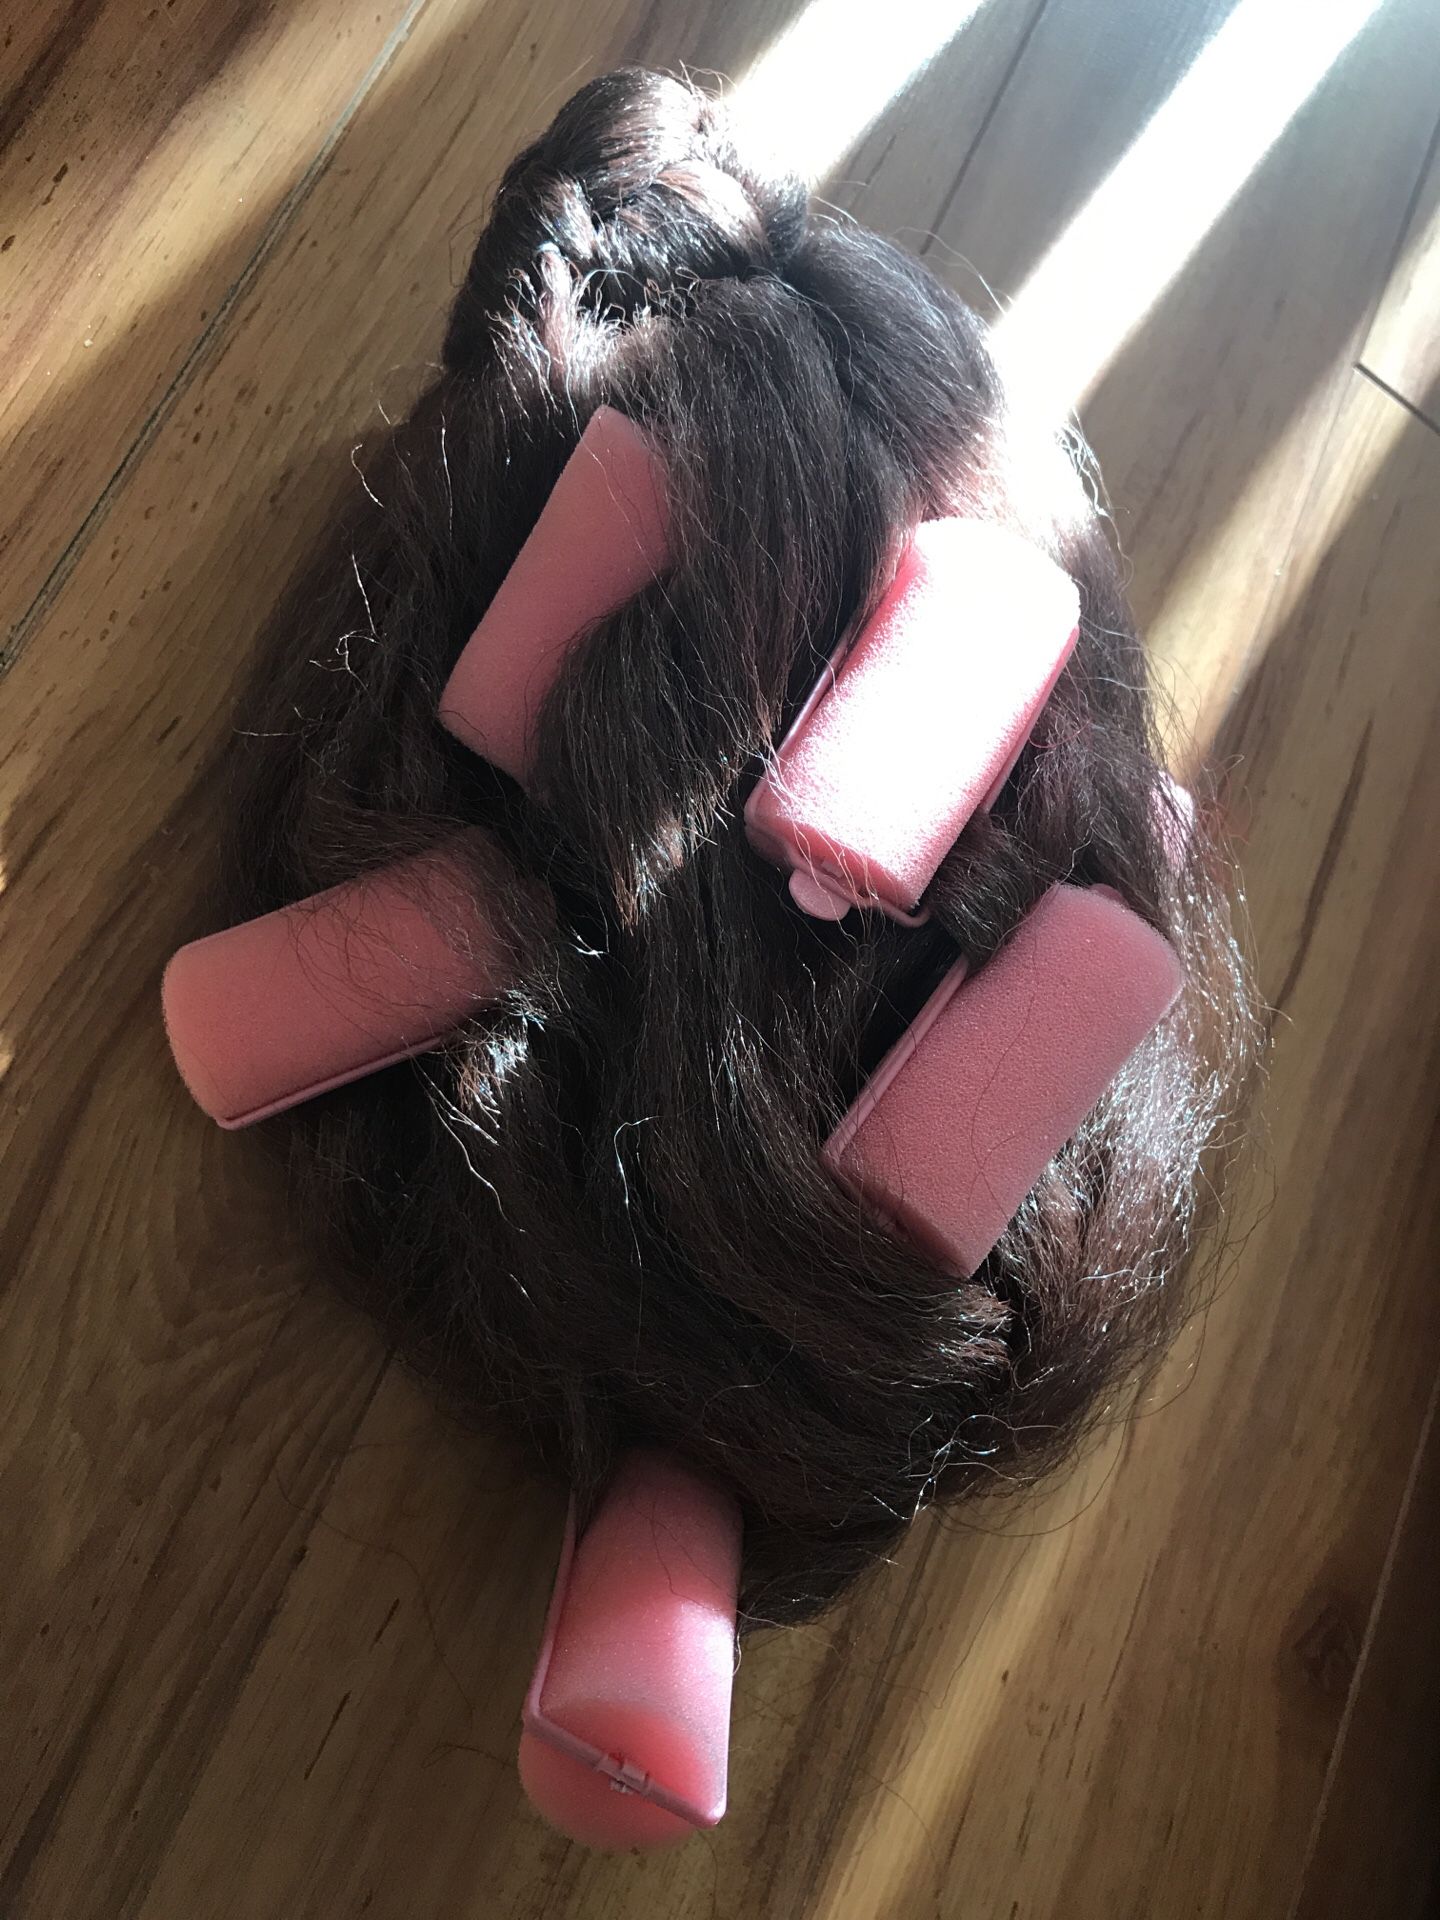 Old lady wig - hair in rollers / curlers